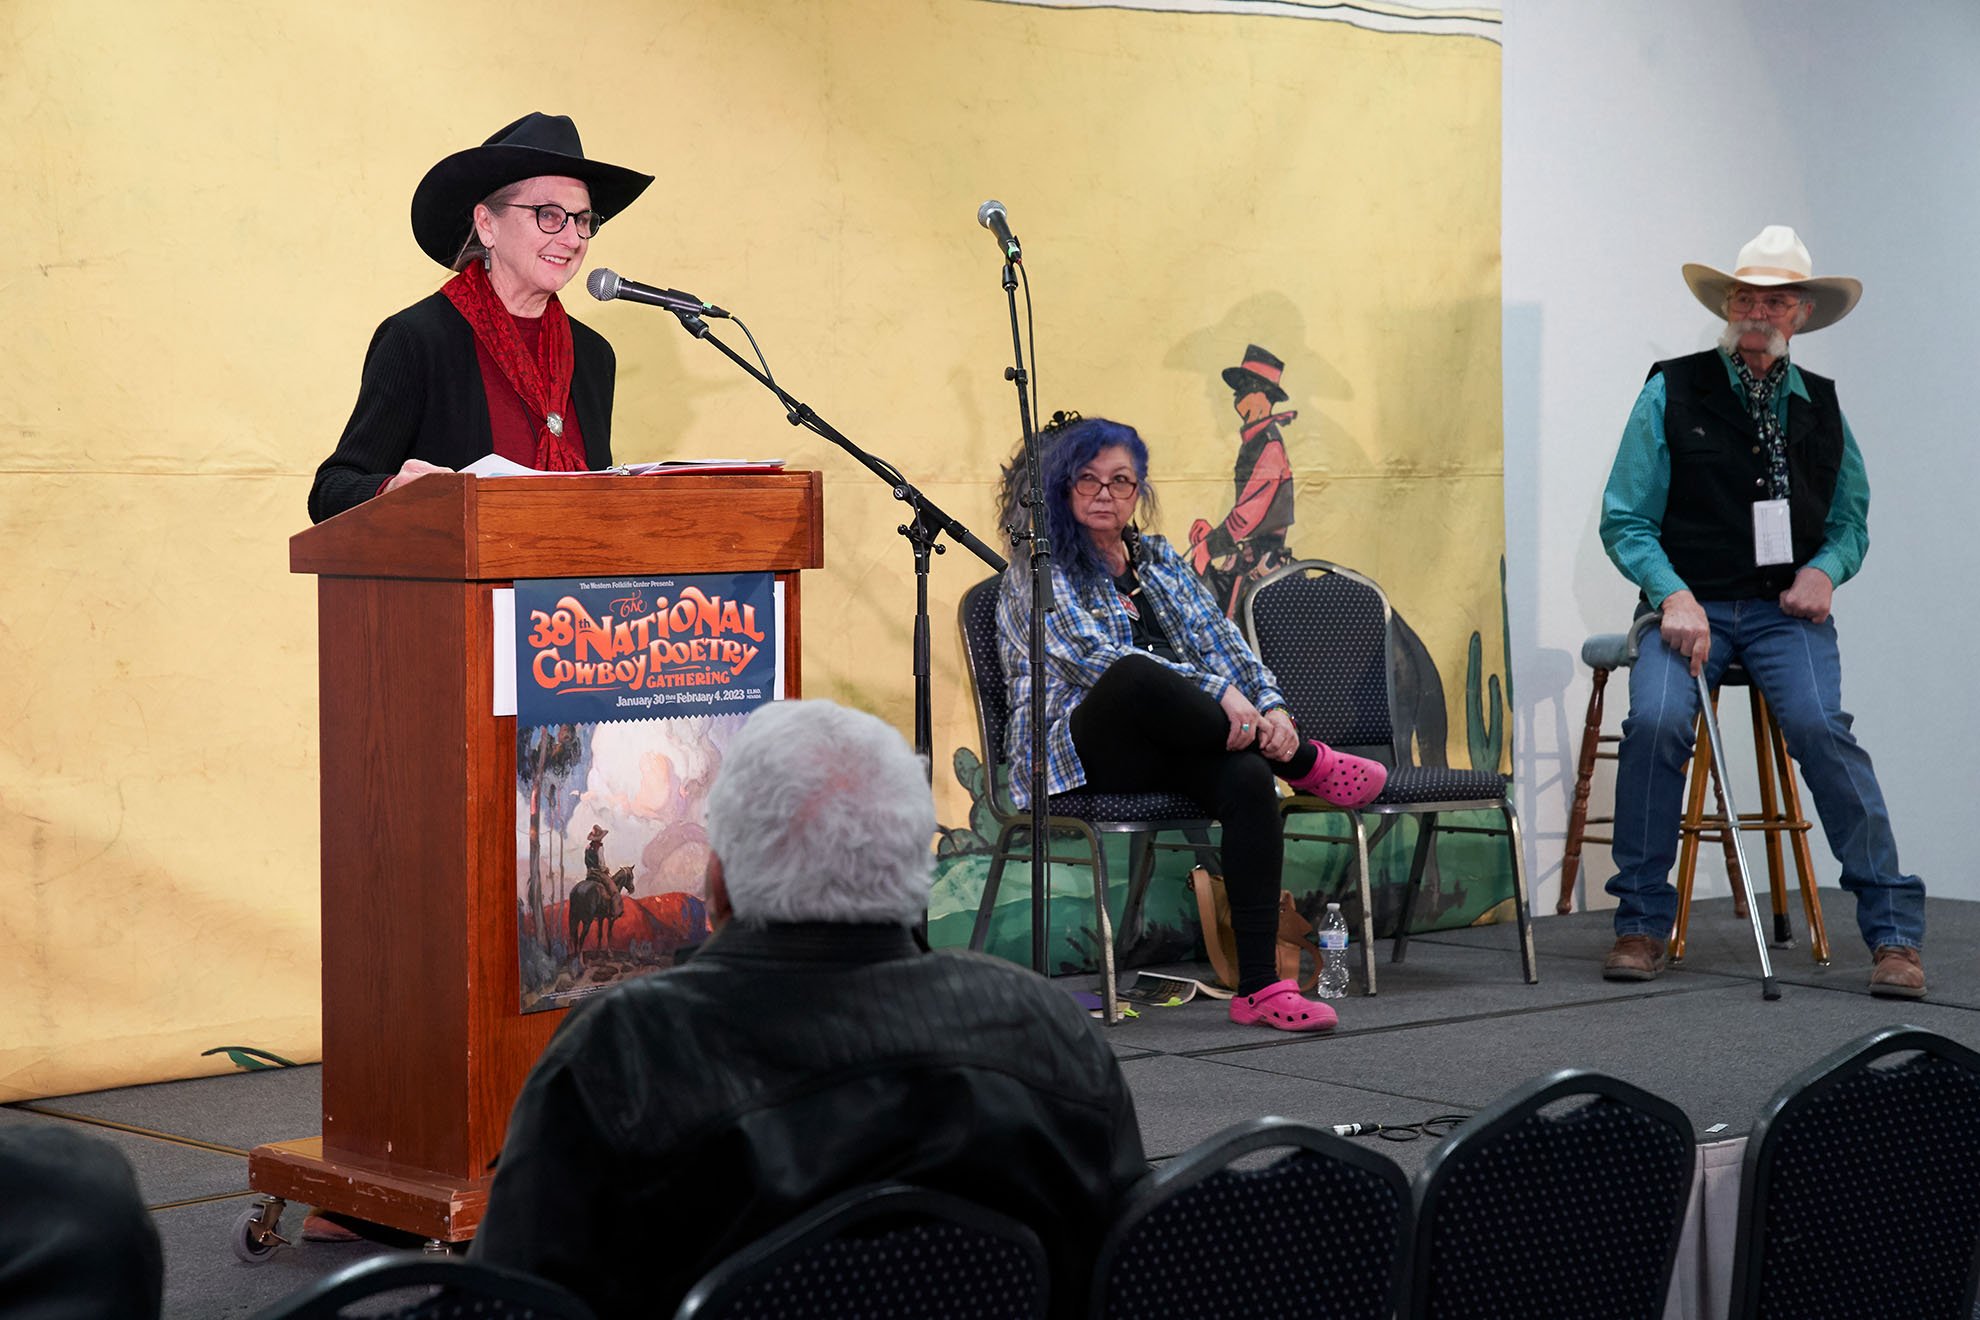  Maria Lisa Eastman (left, at podium) with nila northsun (center) and Floyd Beard (right) during the  In Earth’s Arms  session. Photo by Marla Aufmuth. 